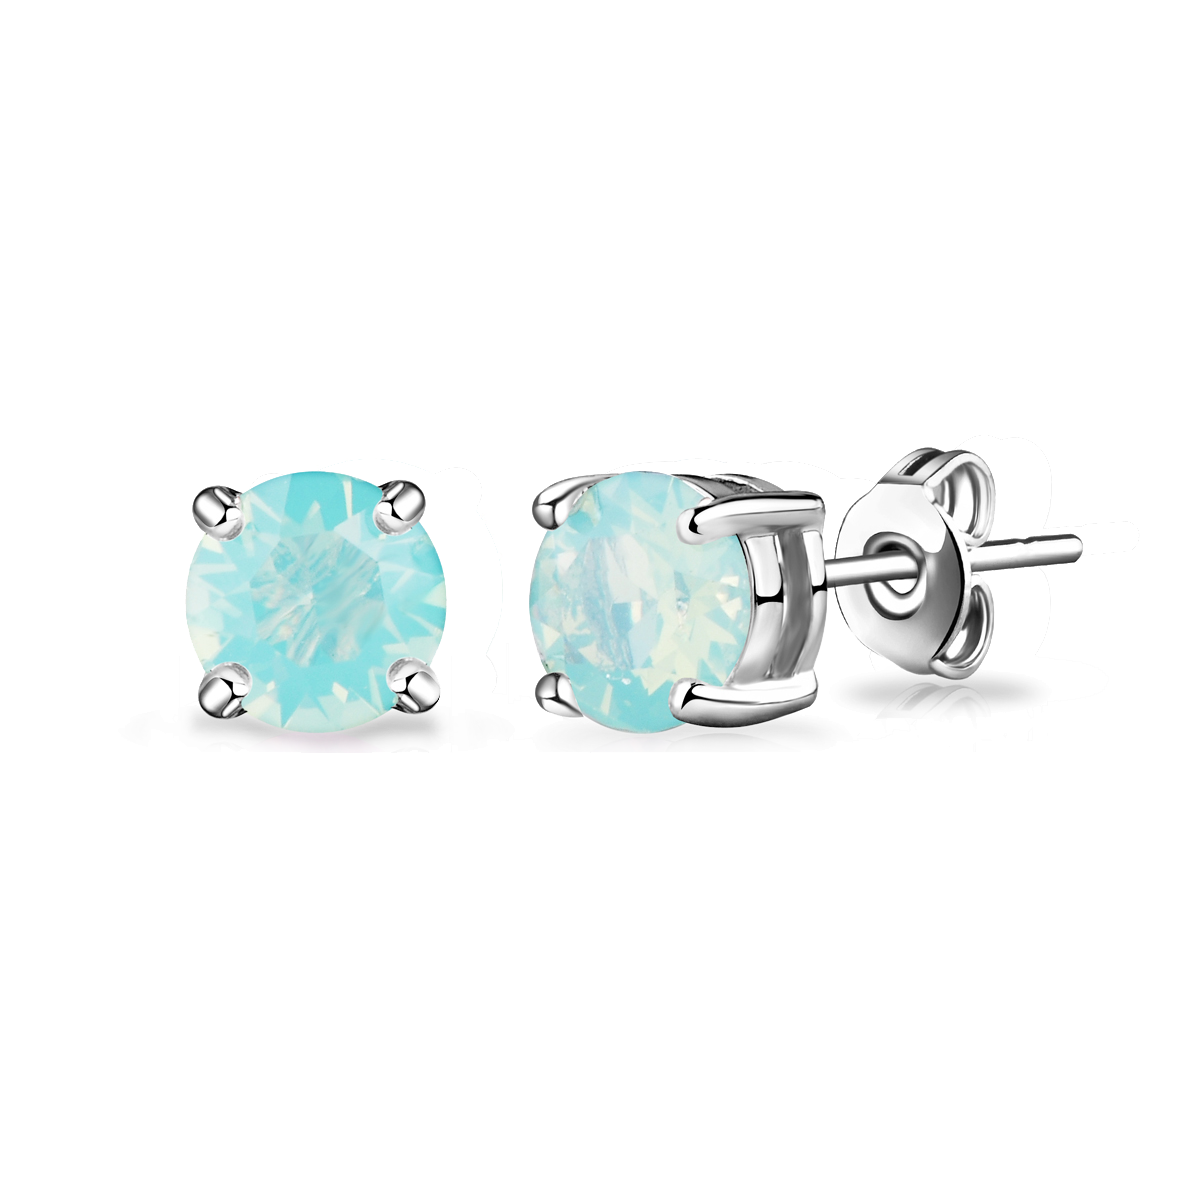 Pacific Green Opal Earrings Created with Zircondia® Crystals by Philip Jones Jewellery